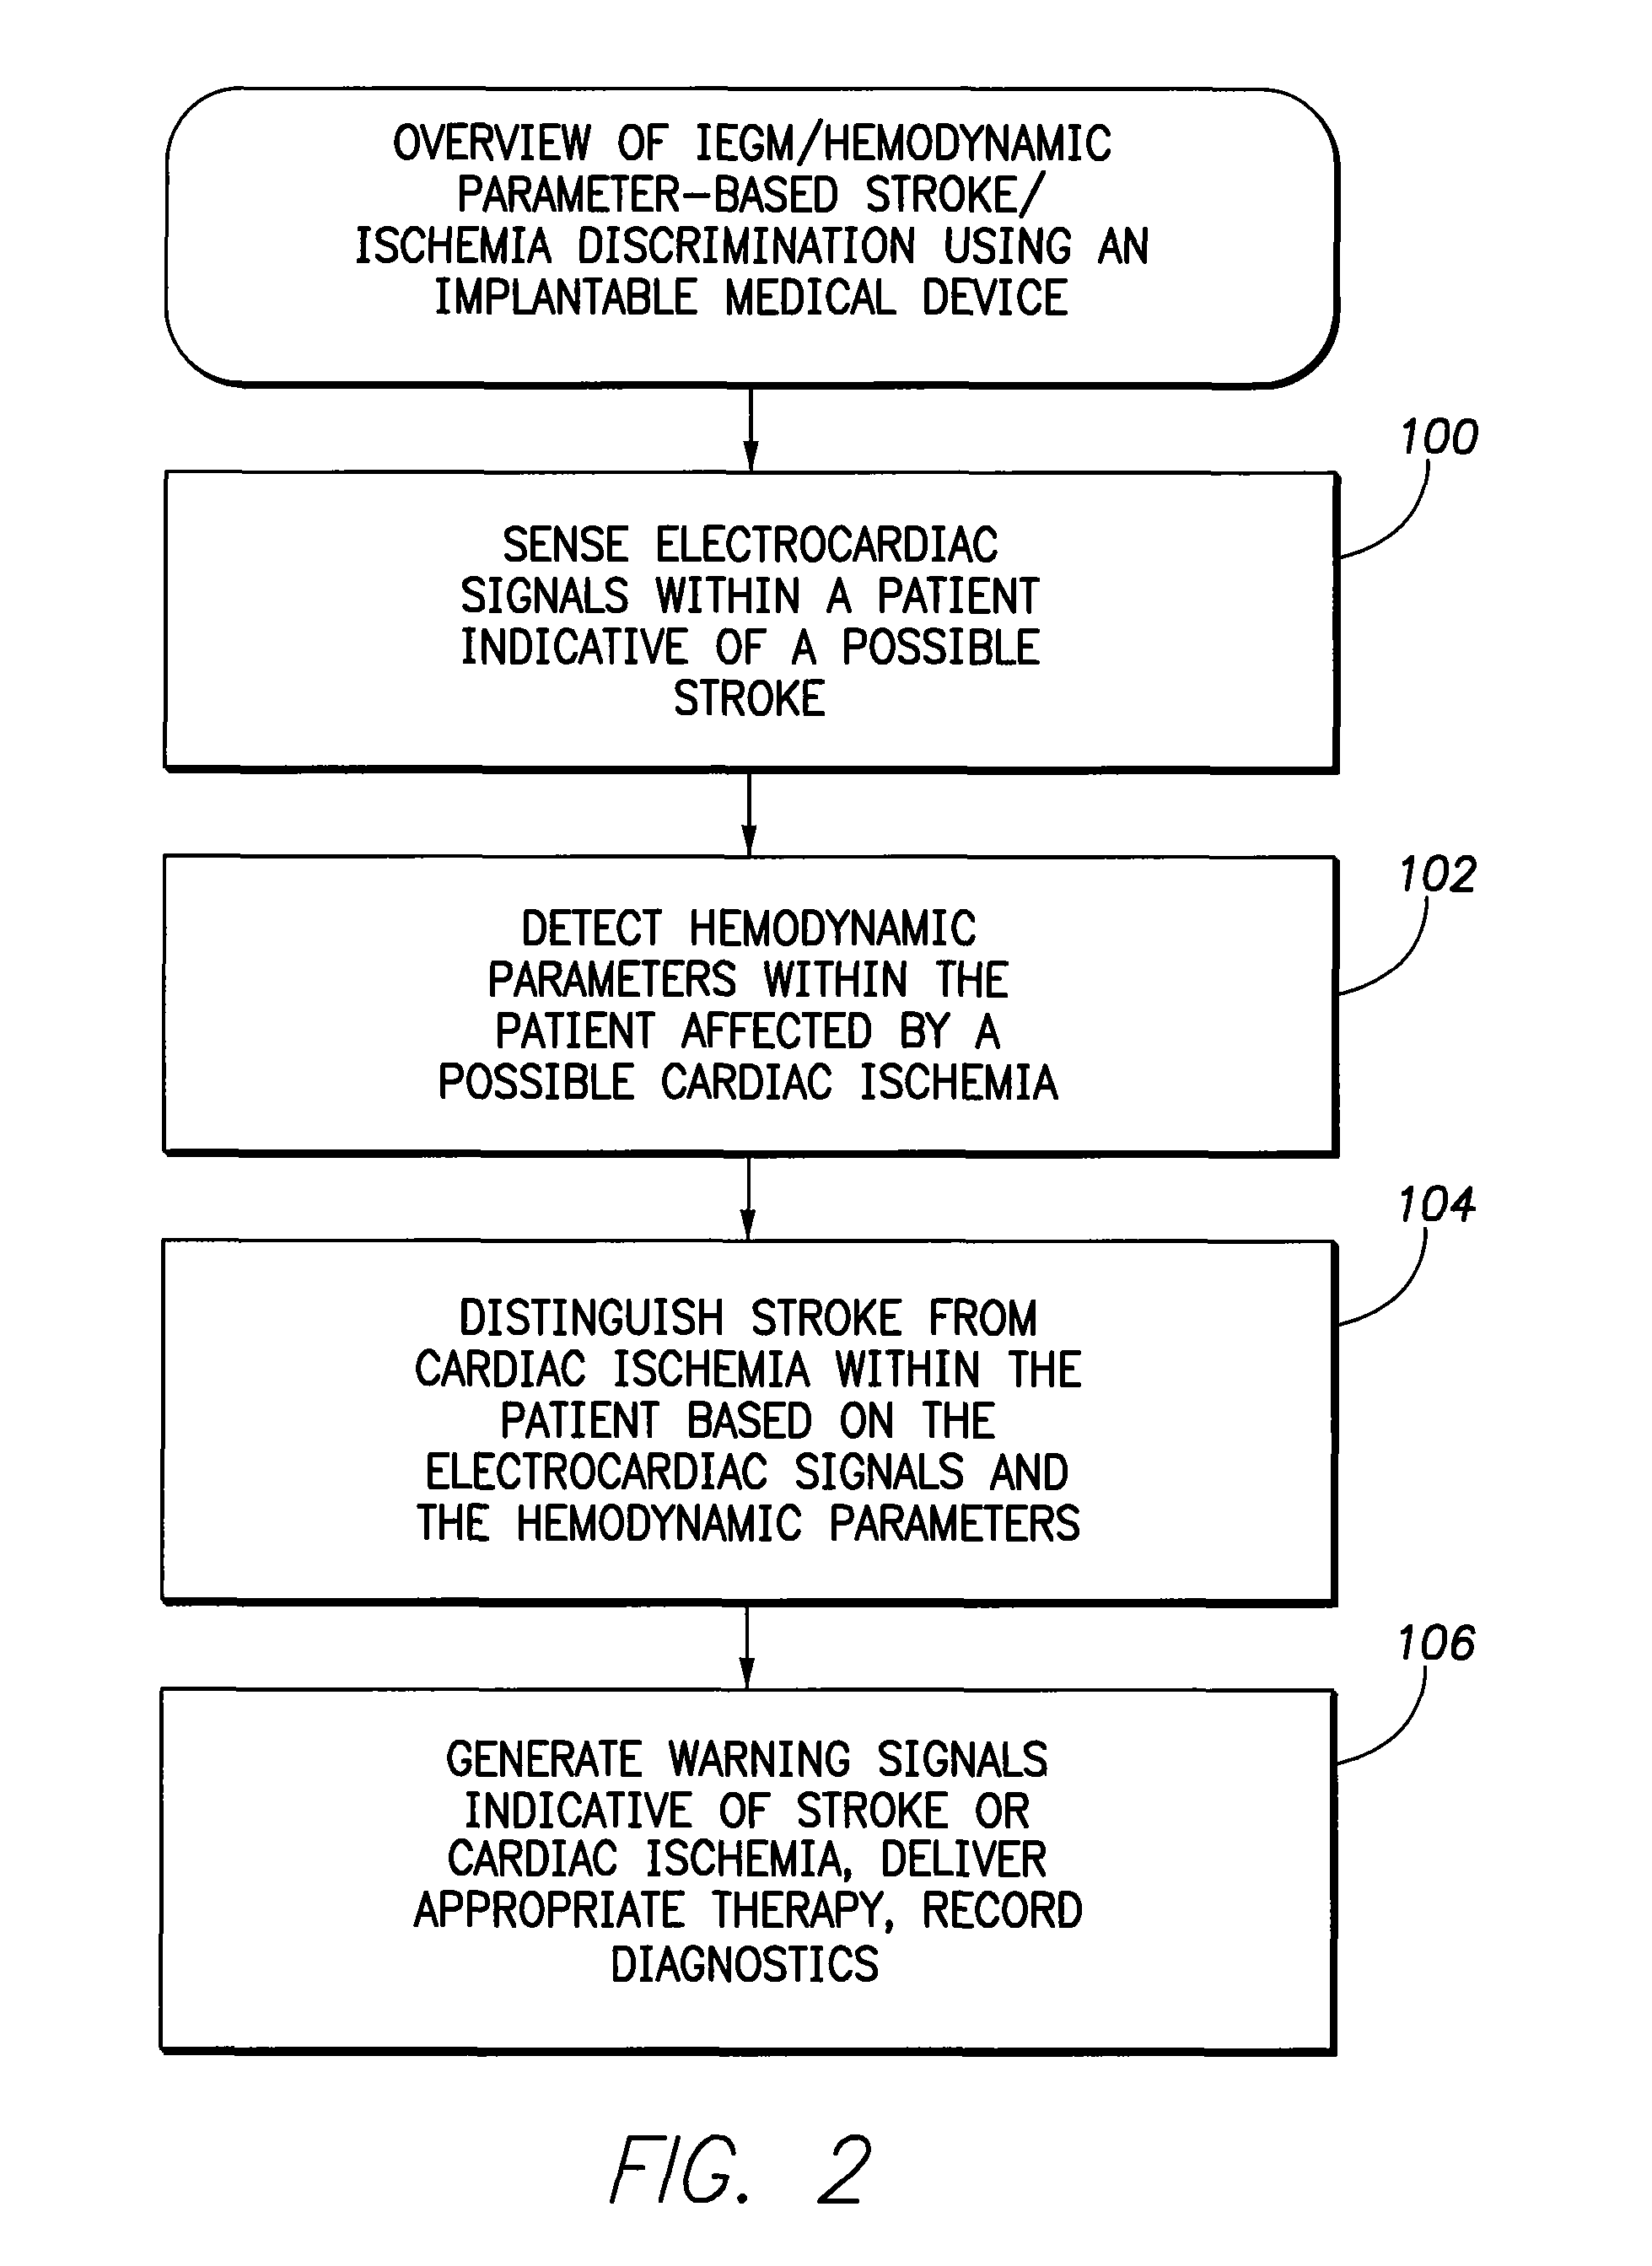 Systems and methods for use by an implantable medical device for detecting and discriminating stroke and cardiac ischemia using electrocardiac signals and hemodynamic parameters